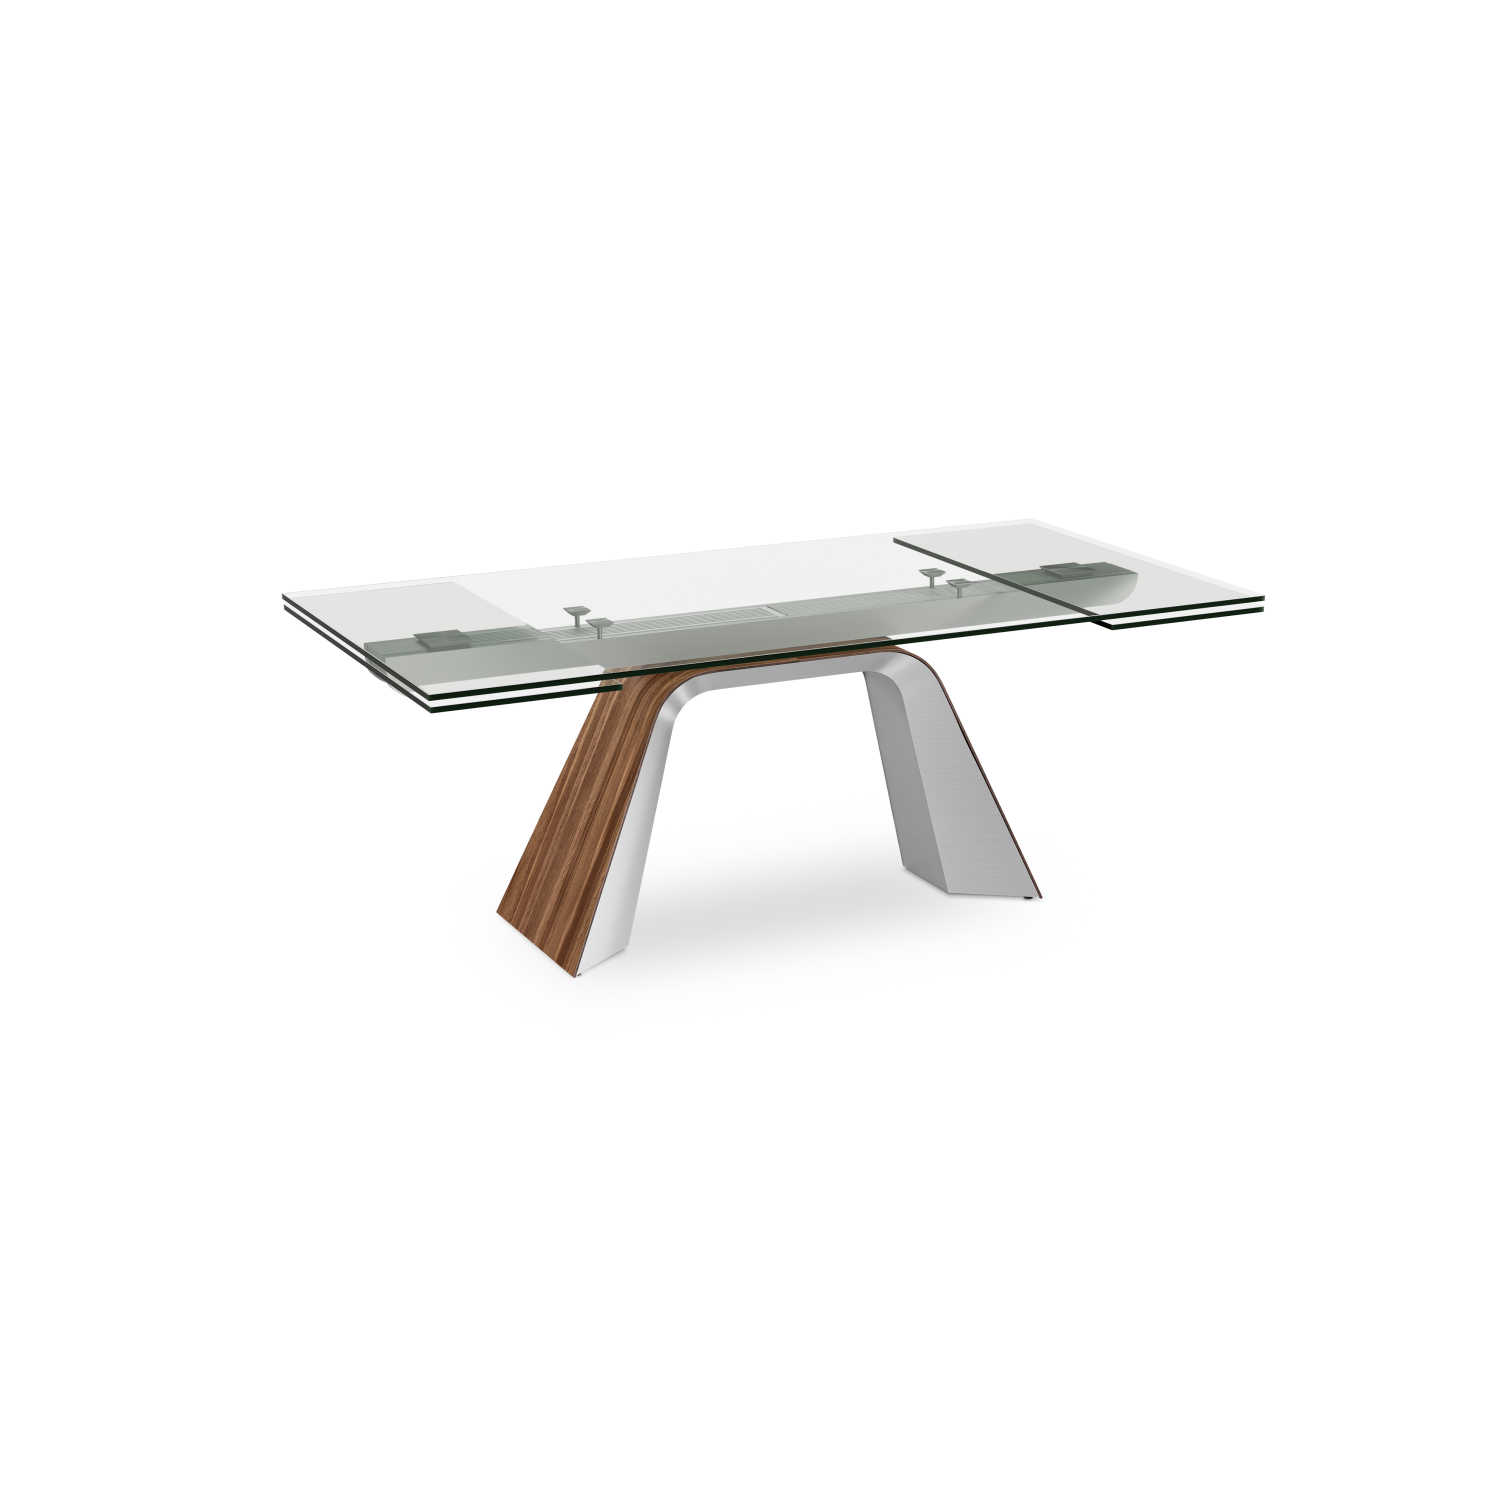 Hyper Dining Table Image